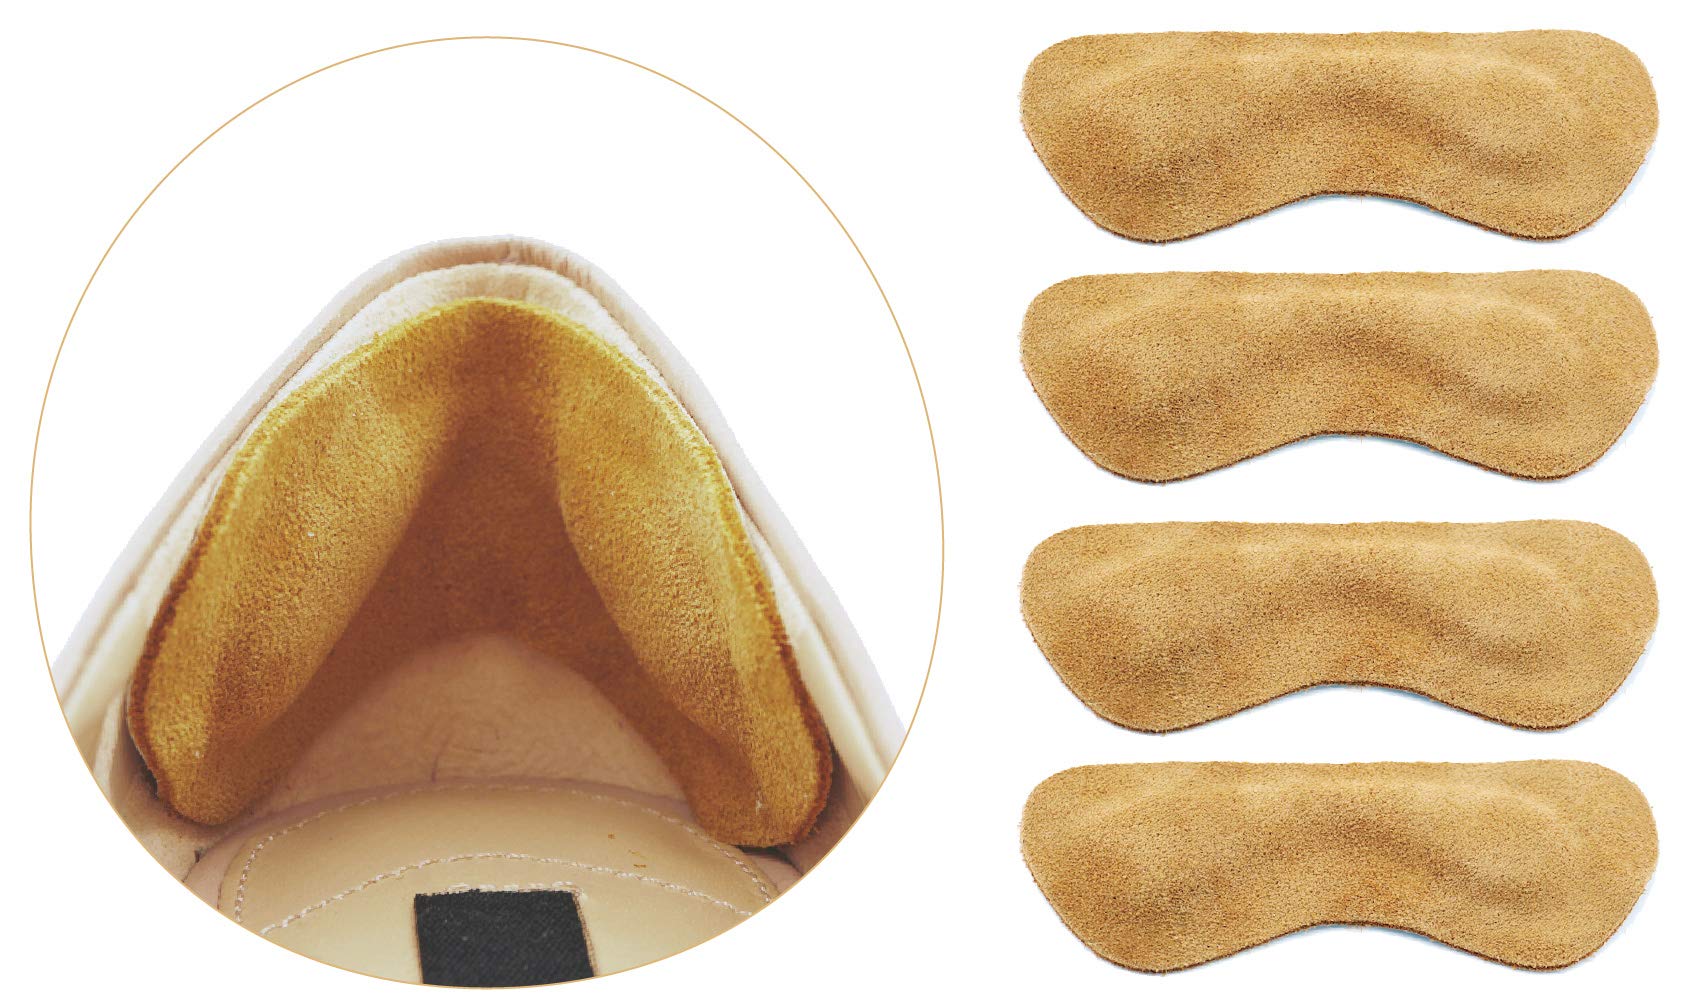 Amazon.com: Heel Grips Heel Cushion Inserts Heel Pads Leather for Shoes  Half Size Big 3pairs 0.14inch Thick Improved Shoe Fit and Comfort,Prevent  Blisters (Beige) : Health & Household